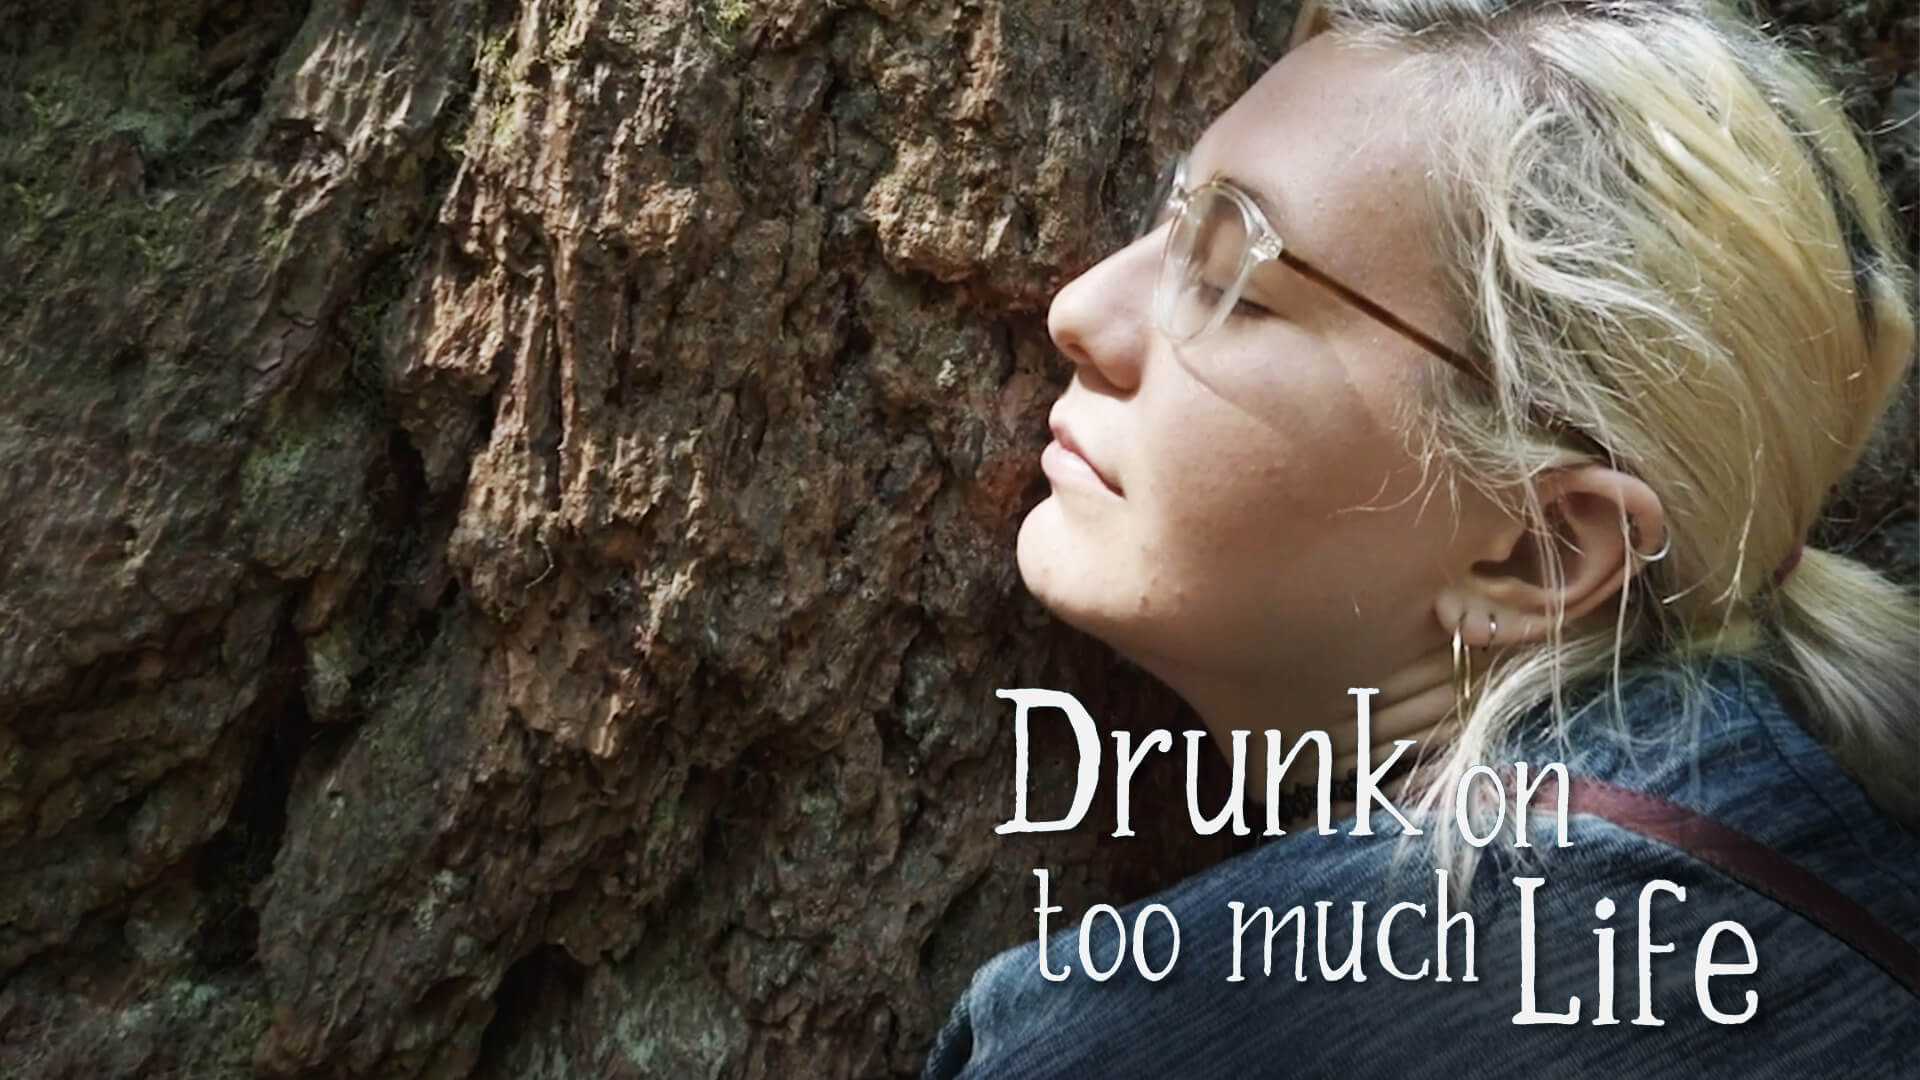 A blonde woman with glasses presses her cheek onto a tree trunk. The title Drunk on Too Much Life appears on the image.